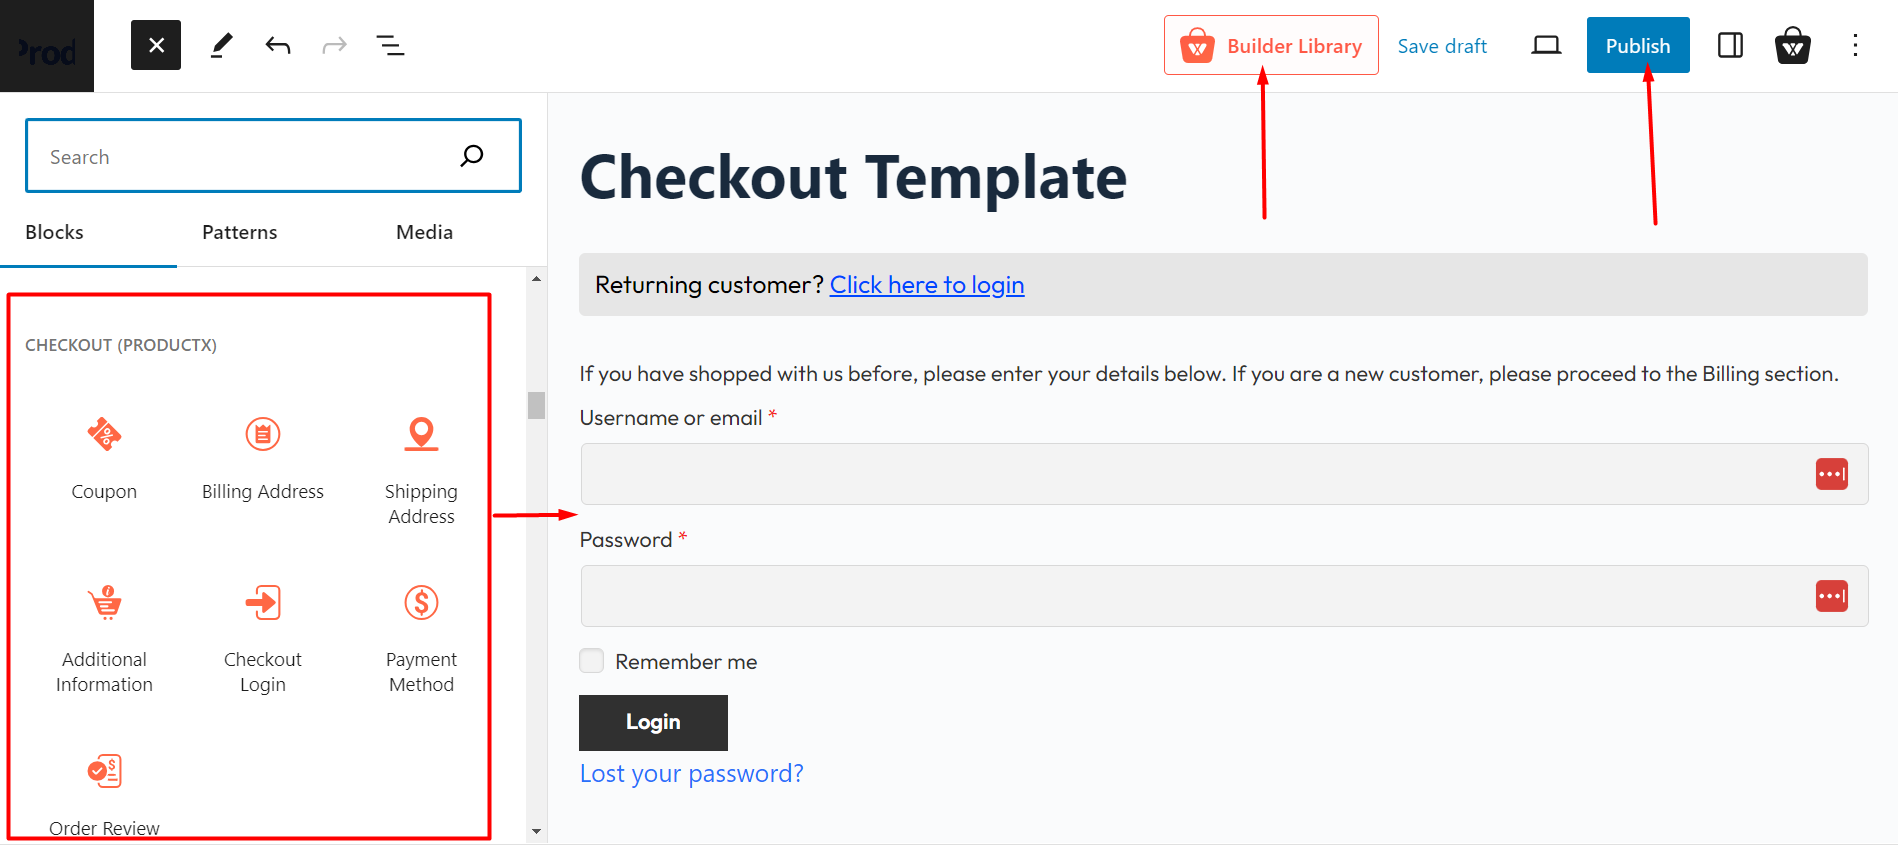 Checkout template editor page